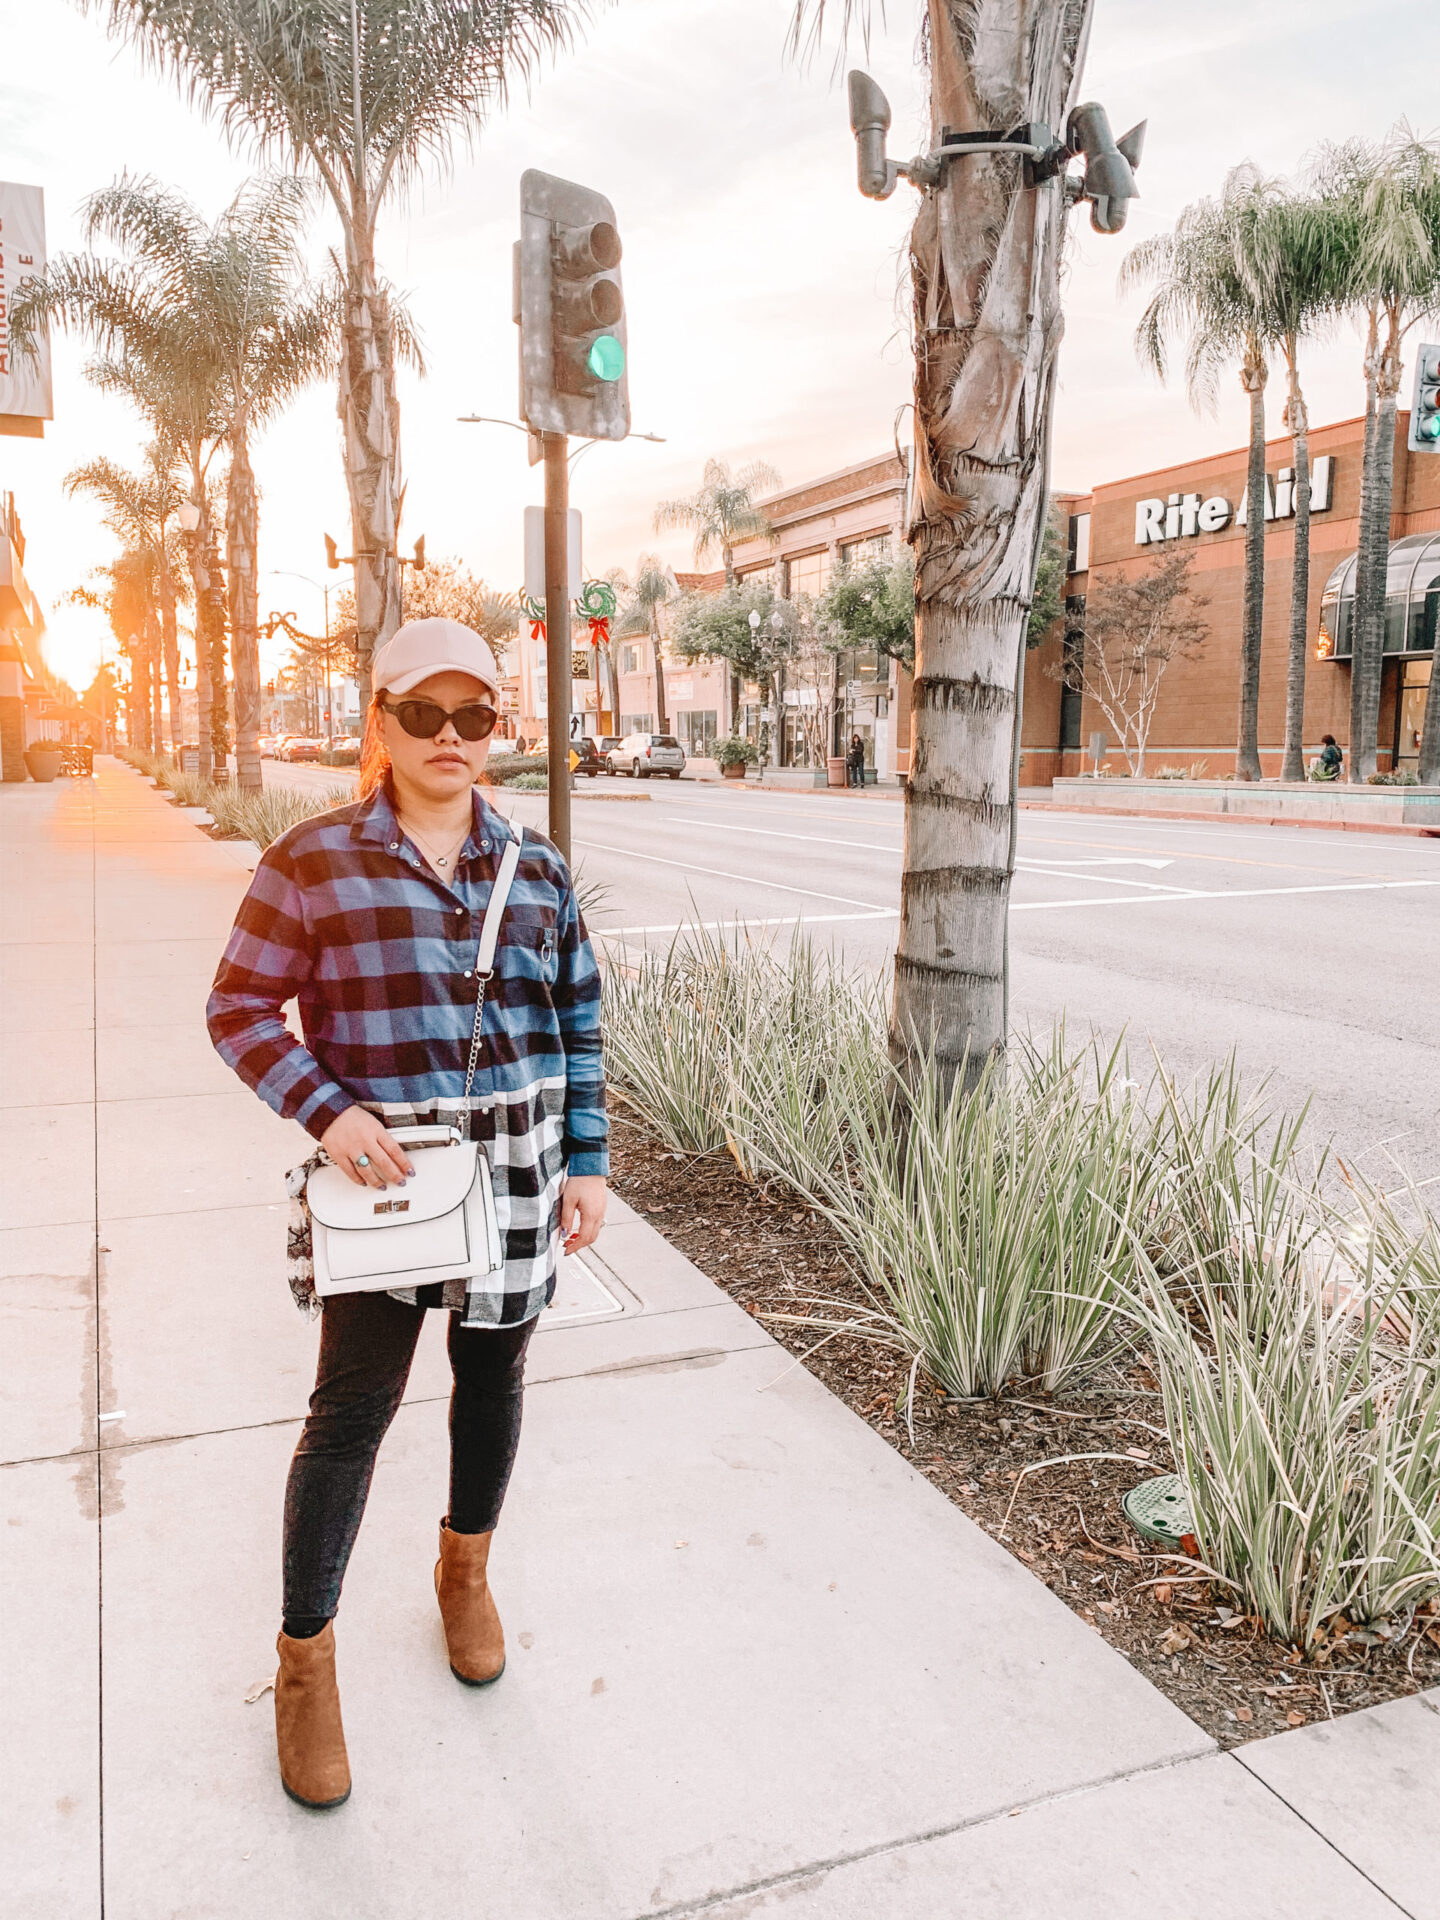 instagram-pslilyboutique-LA-fashion-blogger-H&M-blue-and-white-color-block-long-flannel-shirt-brown-ugg-boots-winter-2020-outfit-ideas-IMG_2404, Instagram: @pslilyboutique, Pinterest, Los Angeles fashion blogger, top fashion blog, best fashion blog, fashion & personal style blog, travel blog, lifestyle blogger, travel blogger, LA fashion blogger, chicago based fashion blogger, fashion influencer, luxury fashion, luxury travel, luxury influencer, luxury lifestyle, lifestyle blog, lifestyle influencer